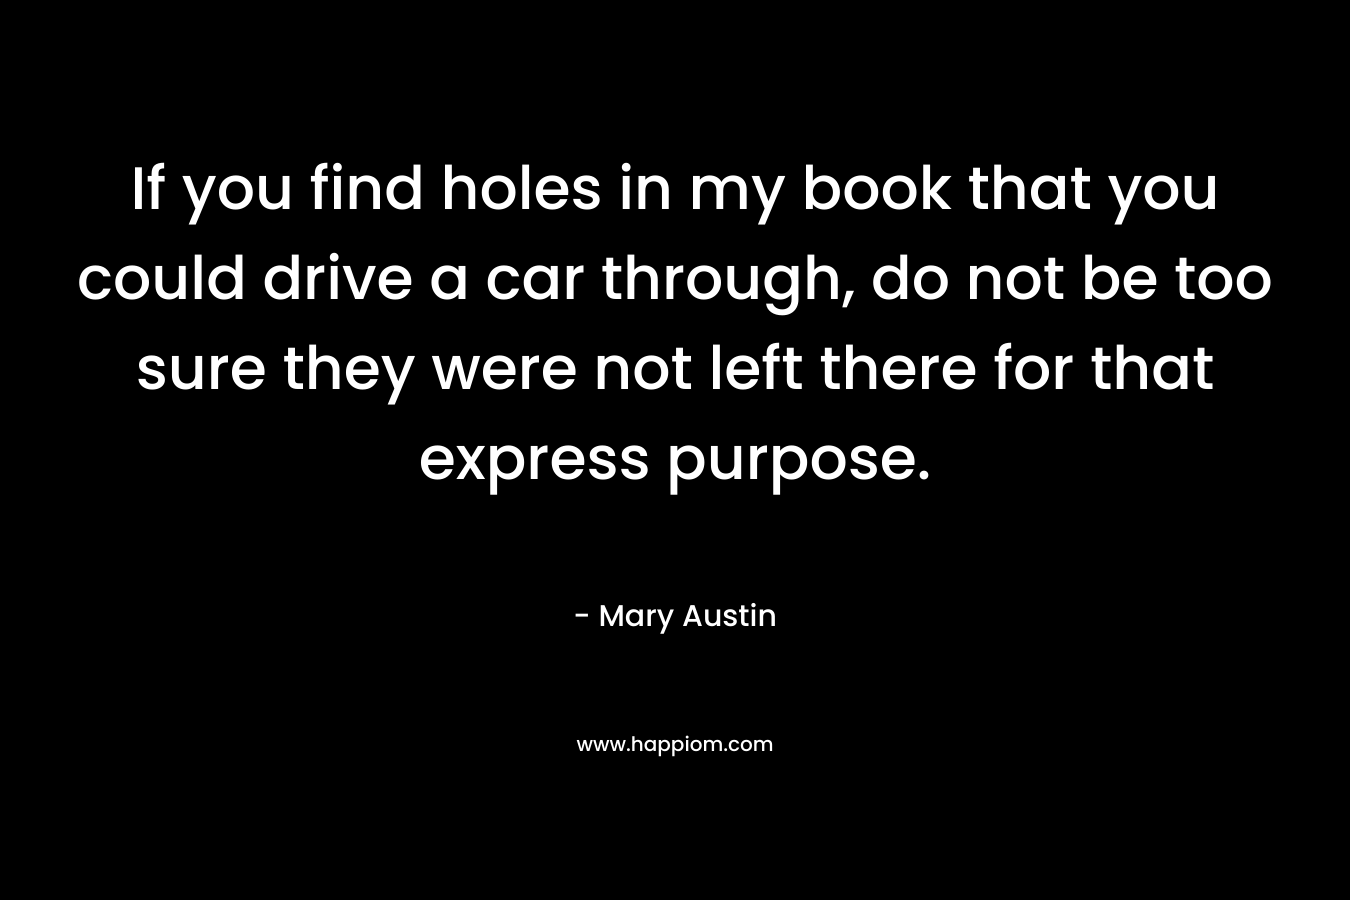 If you find holes in my book that you could drive a car through, do not be too sure they were not left there for that express purpose.